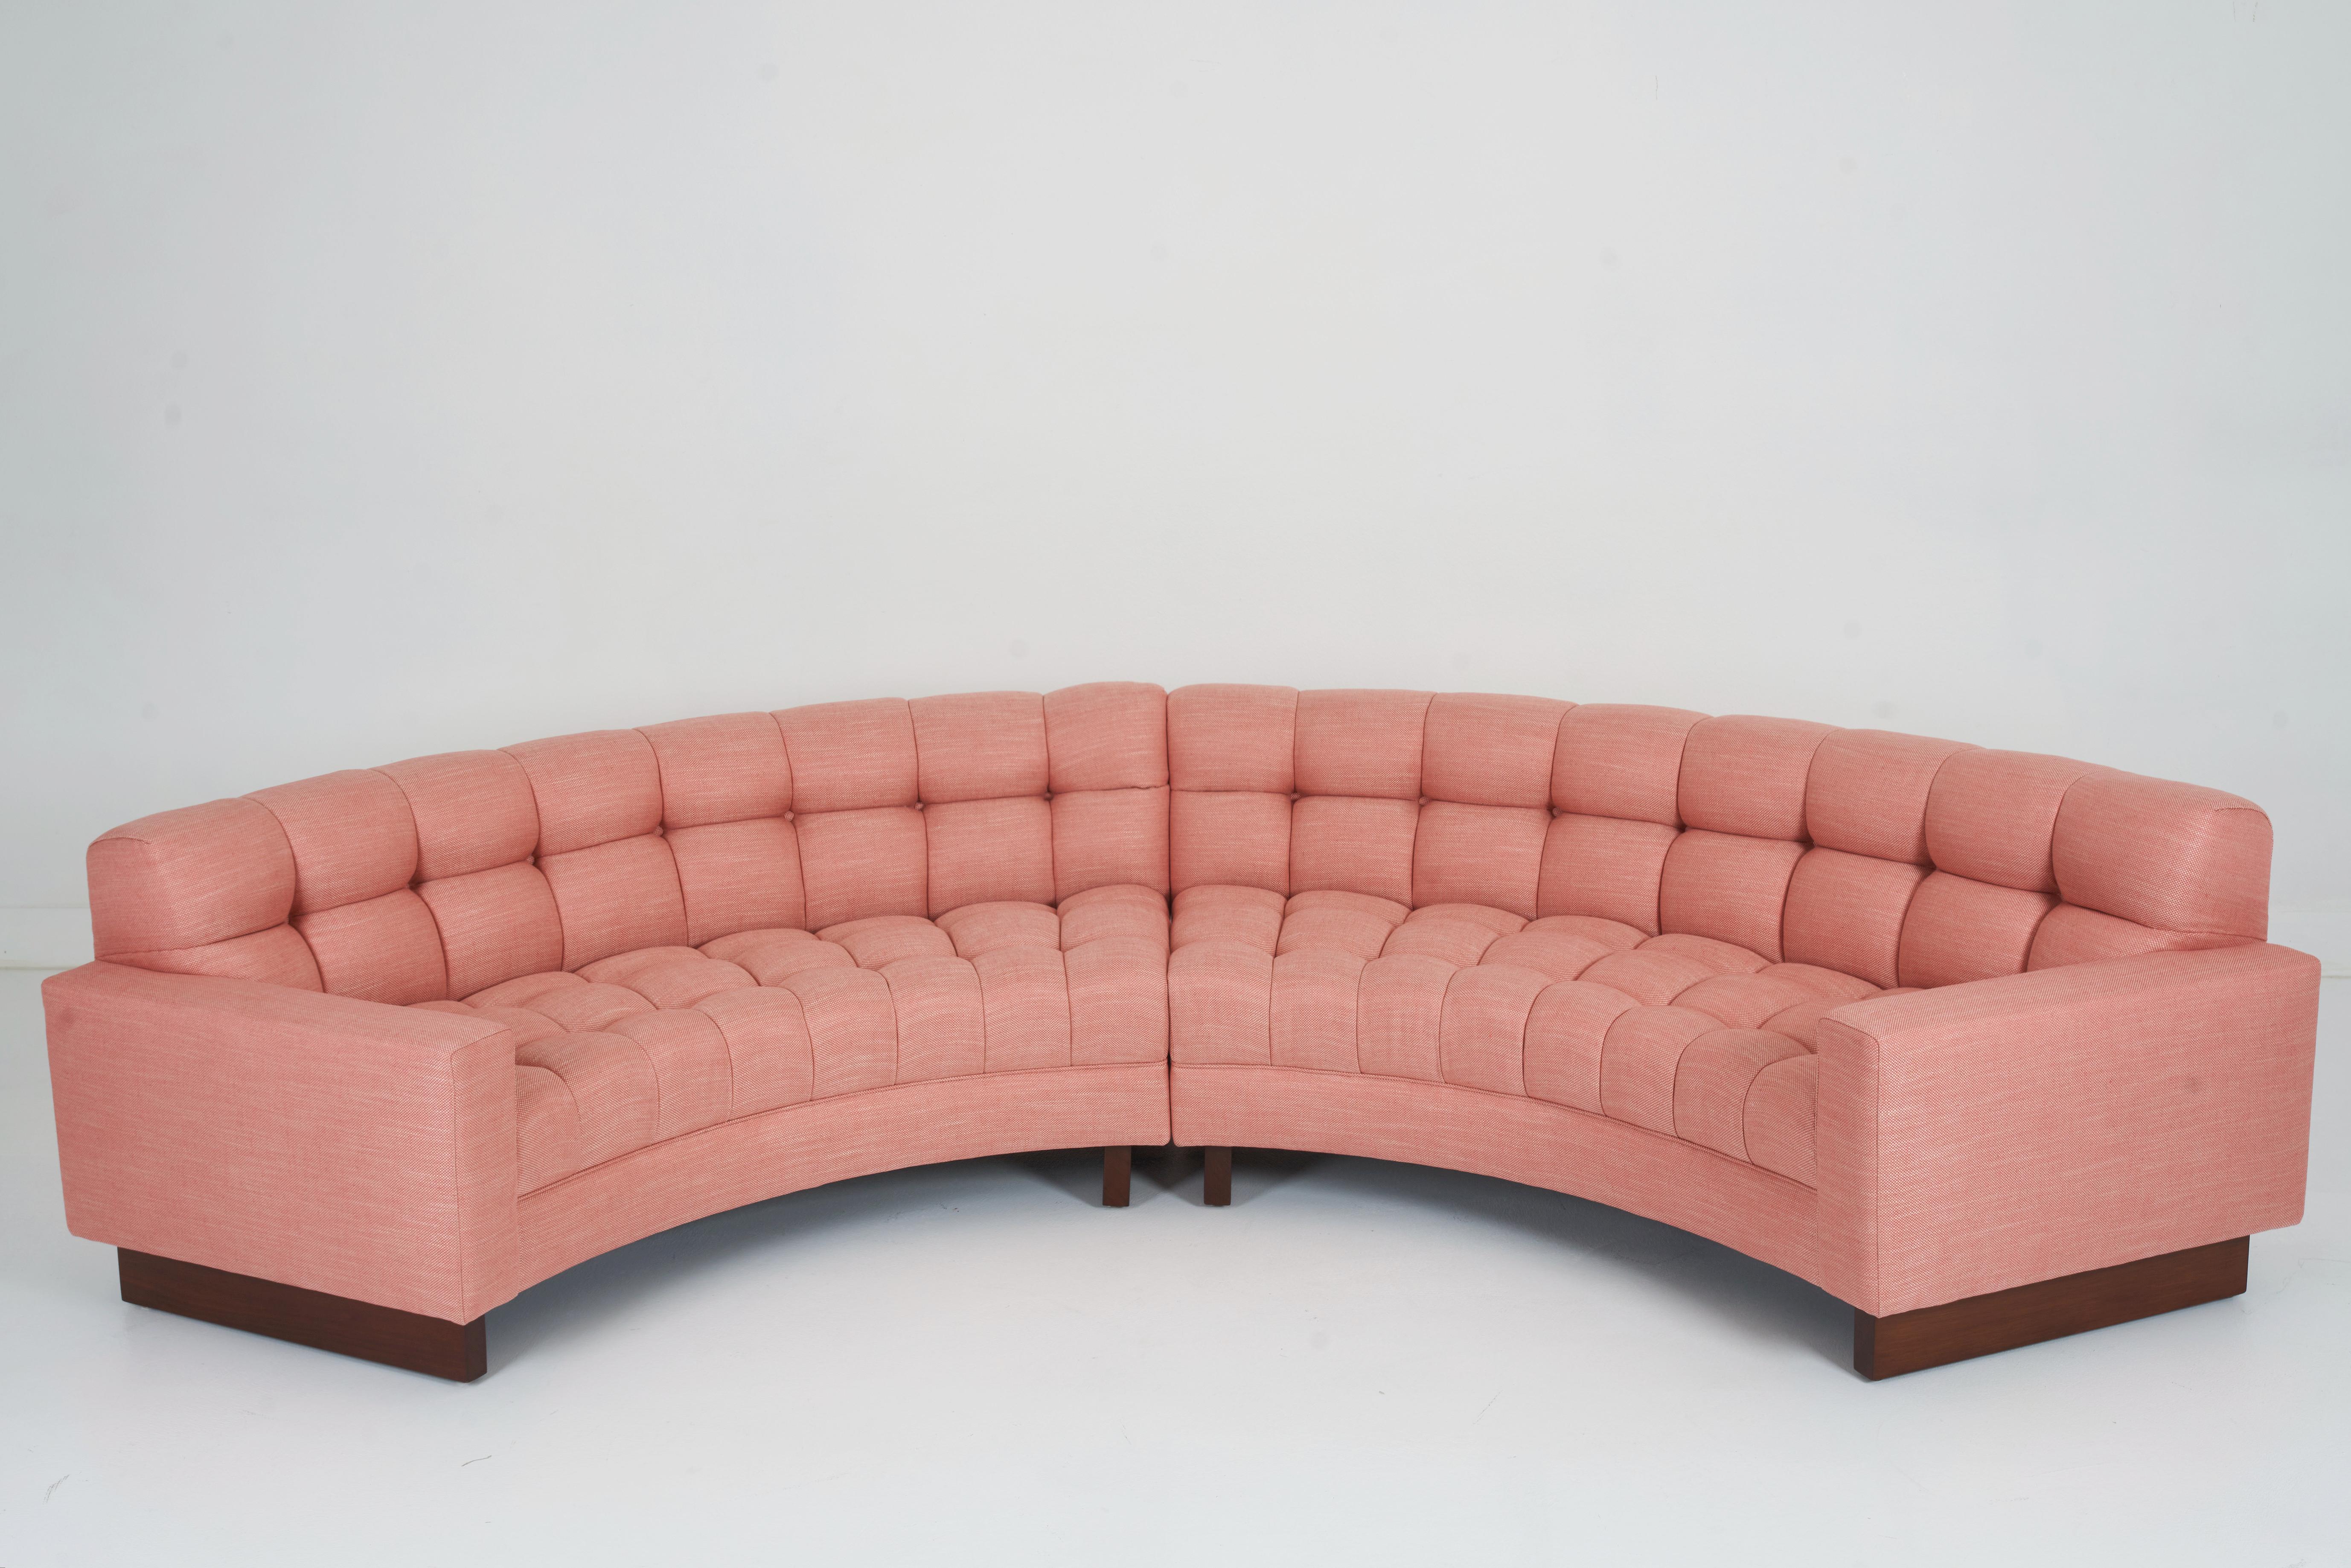 Mid-Century Modern Biscuit Tufted, Guava Colored, Curved Three Piece Sectional by William Haines